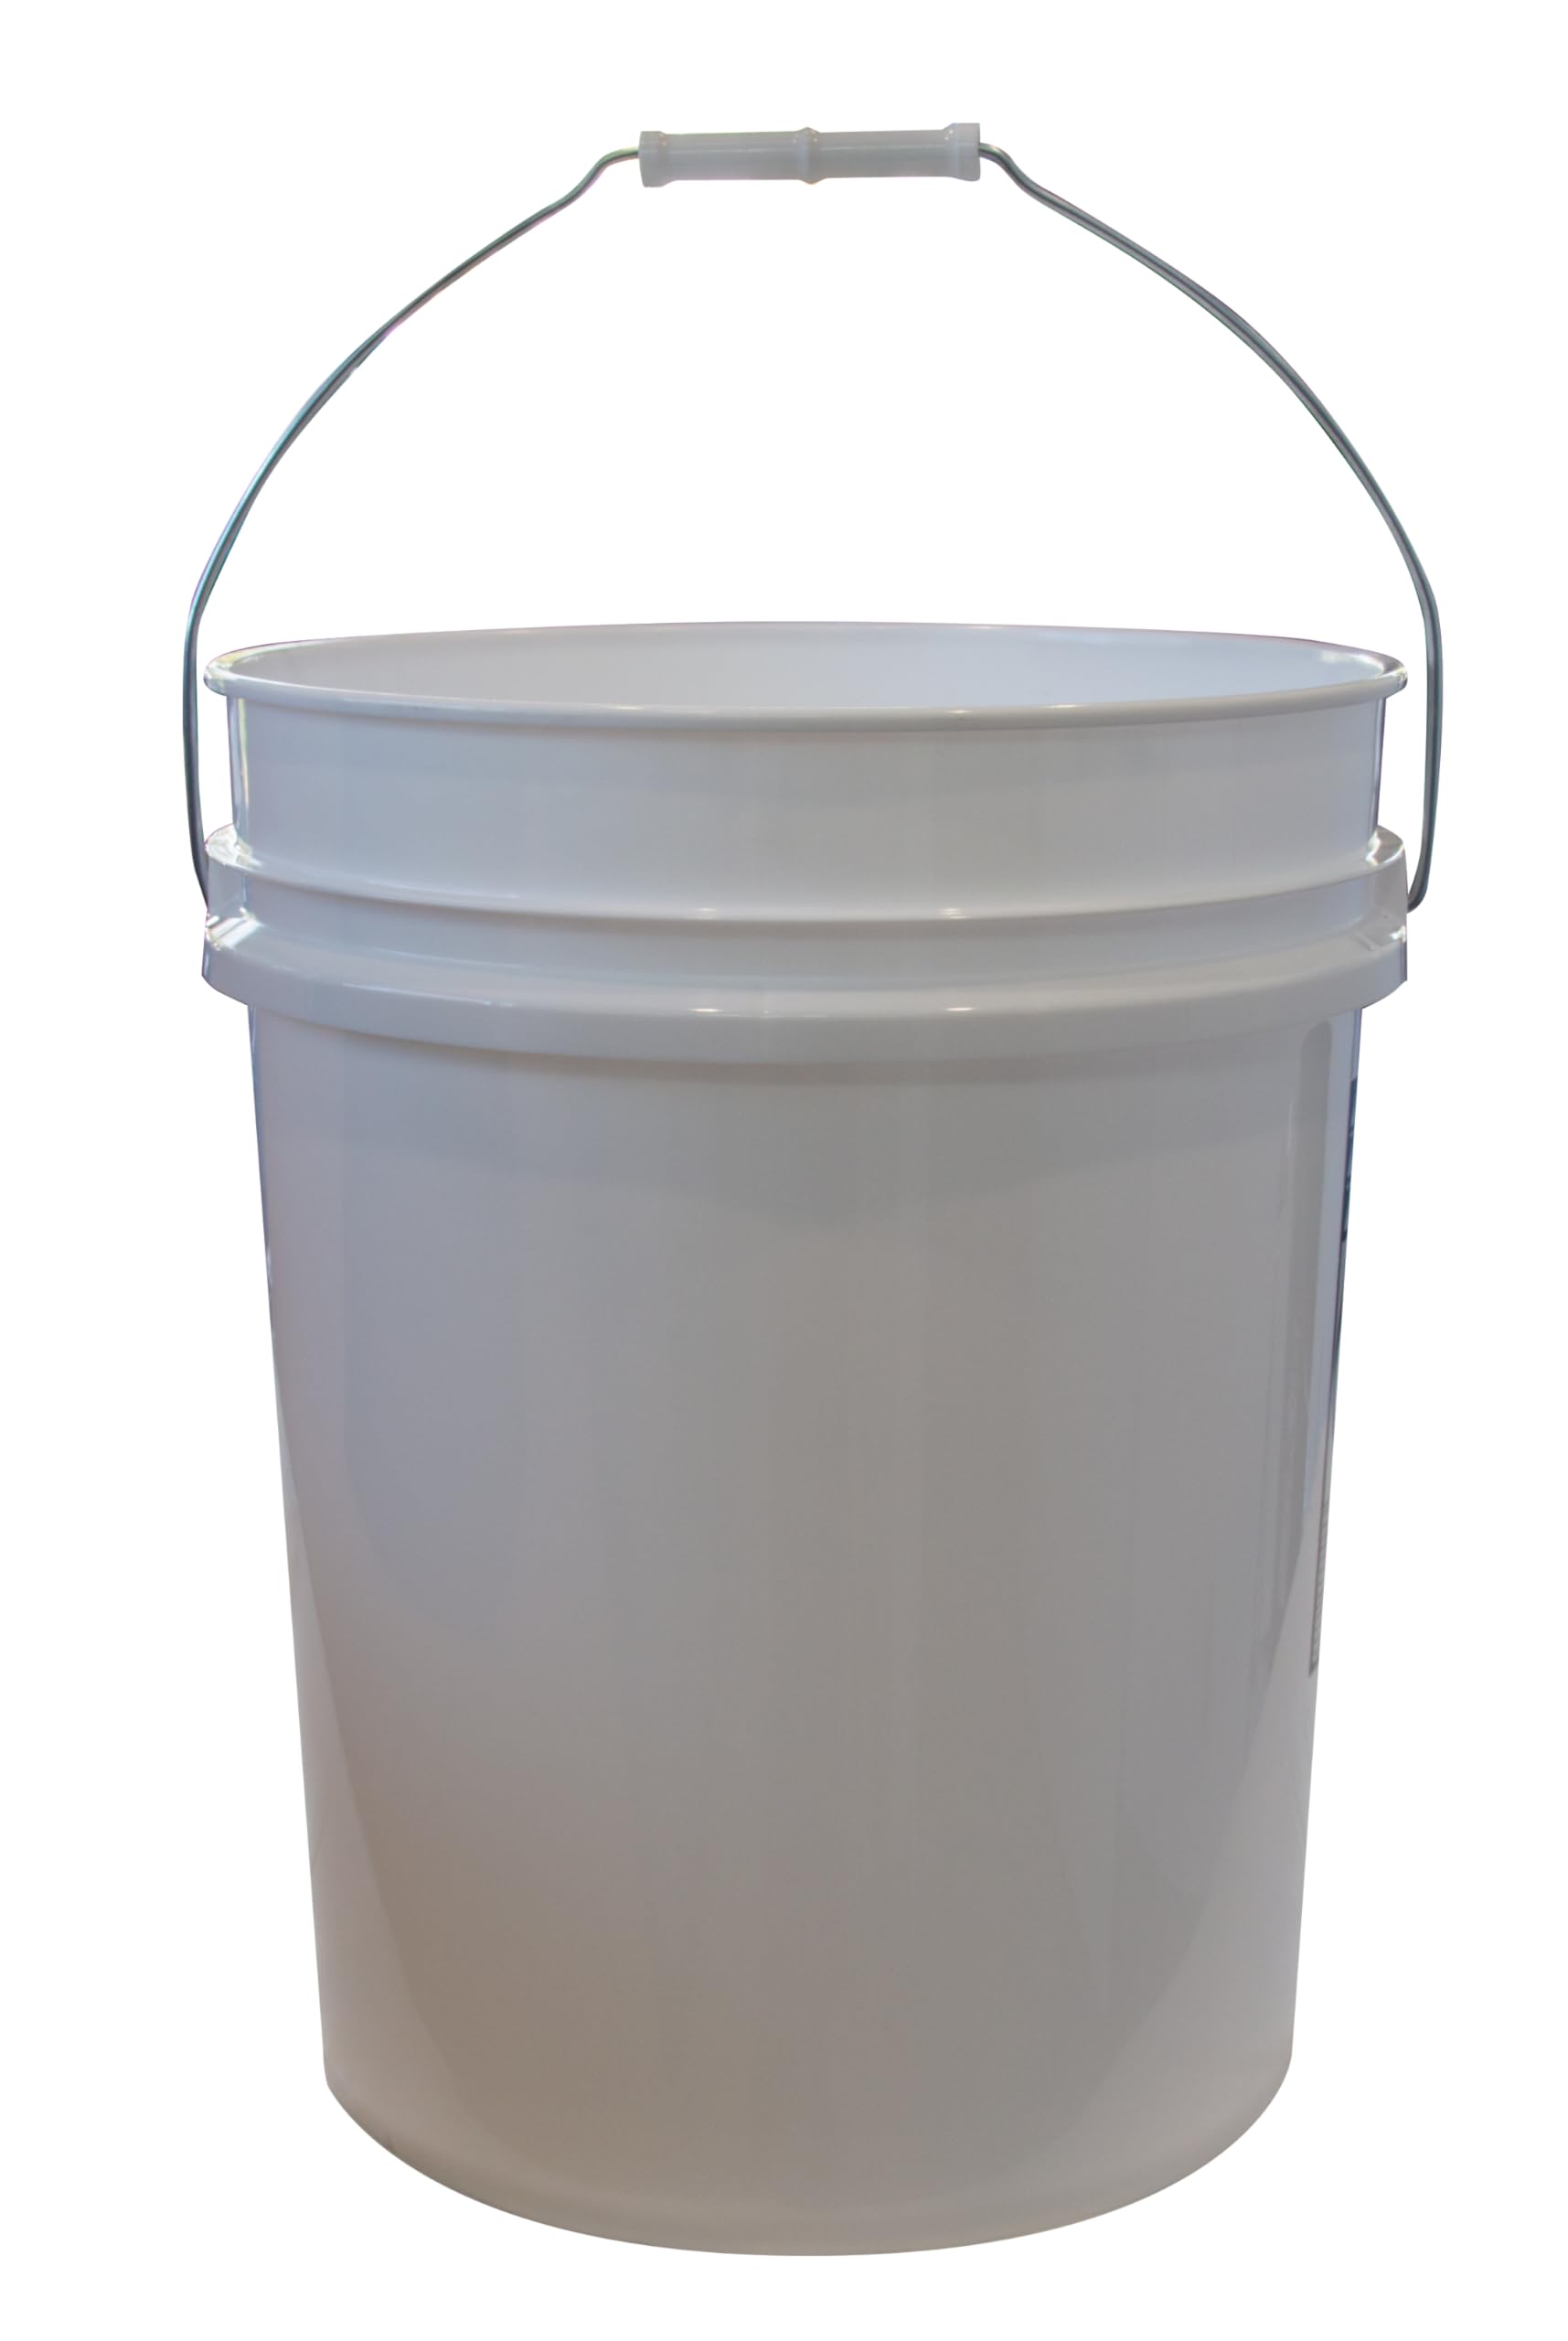 Argee 10 Buckets and 10 Lids, White (5 Gallon) - Plastic Material (RG5500/10)